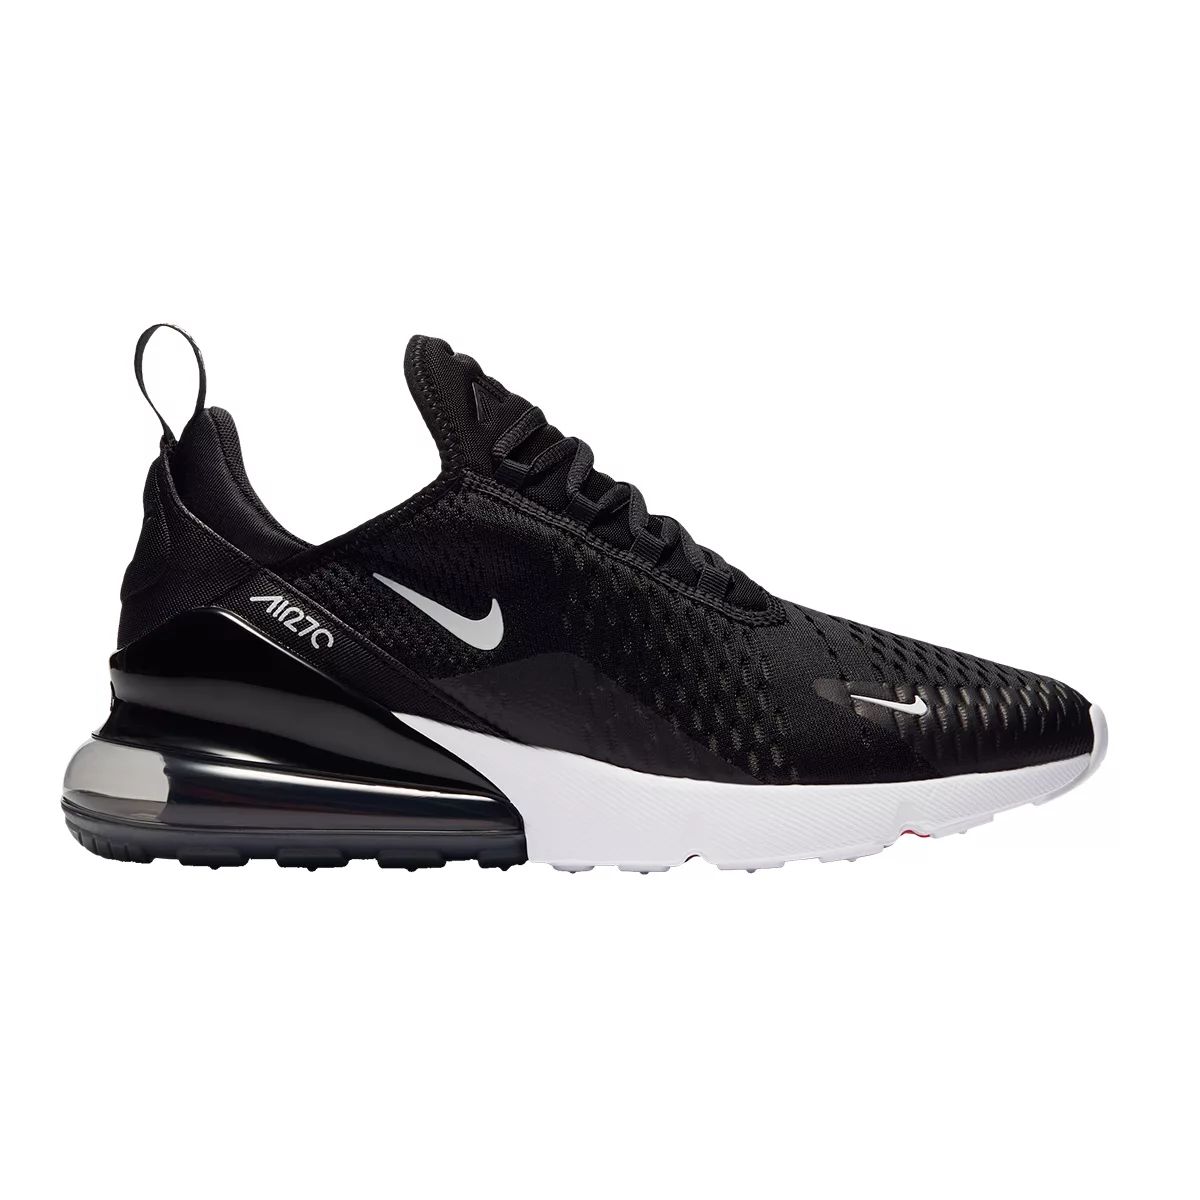 Nike Men's Air Max 270 Shoes Sneakers Running Cushioned